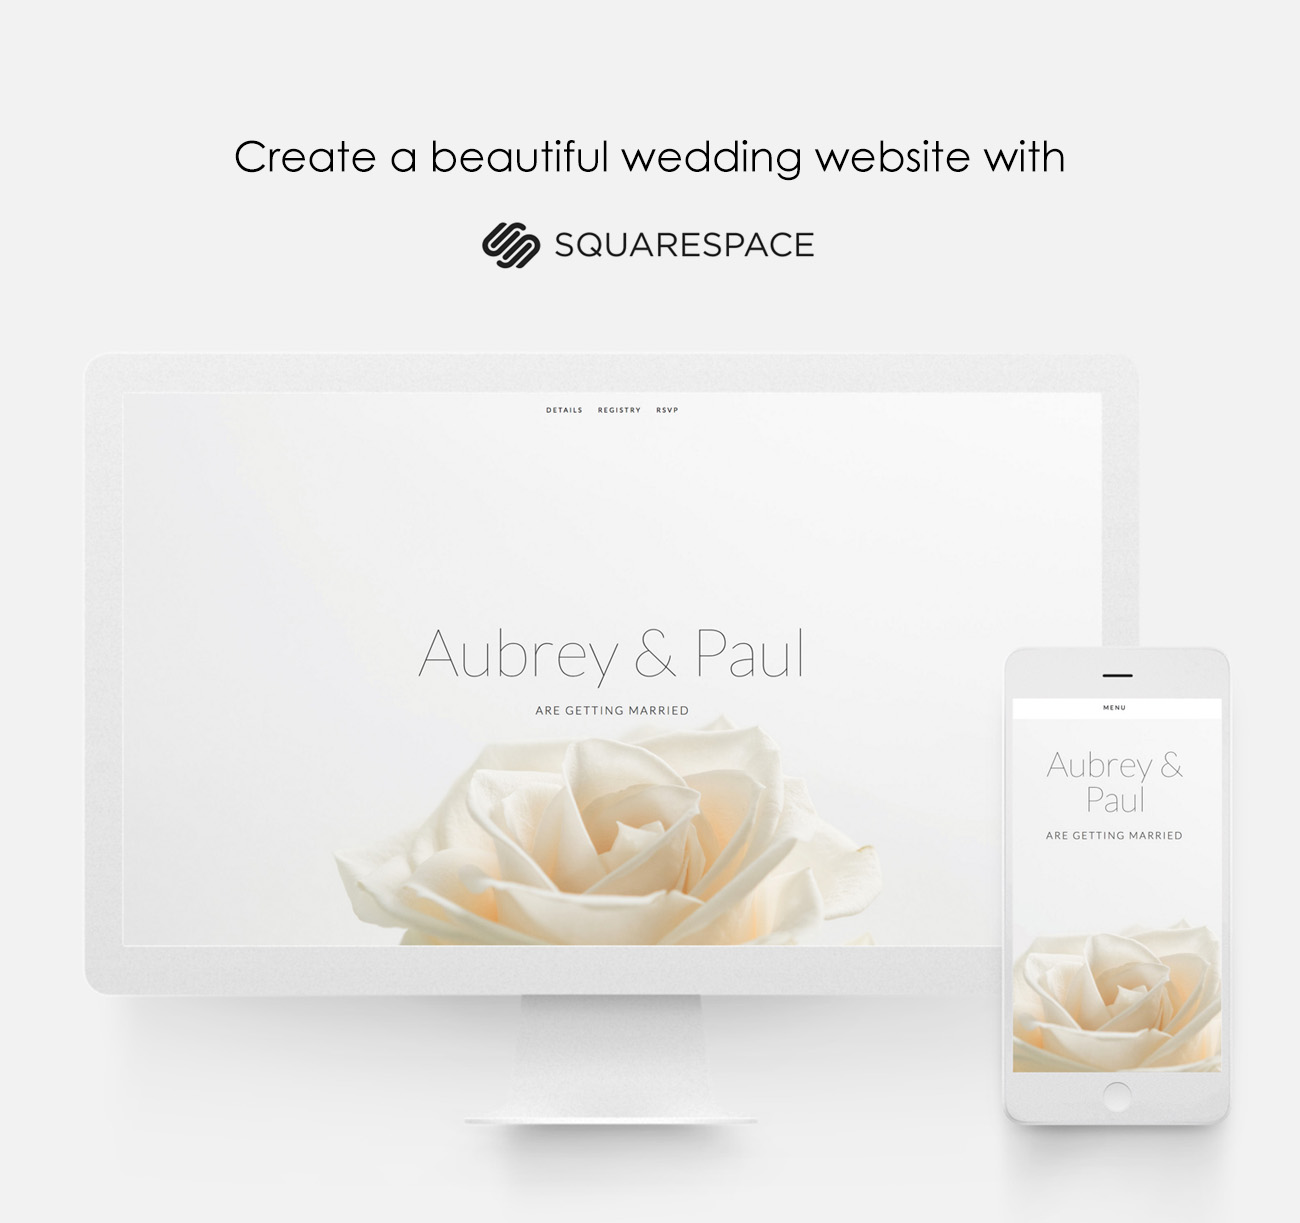 squarespace for your wedding website